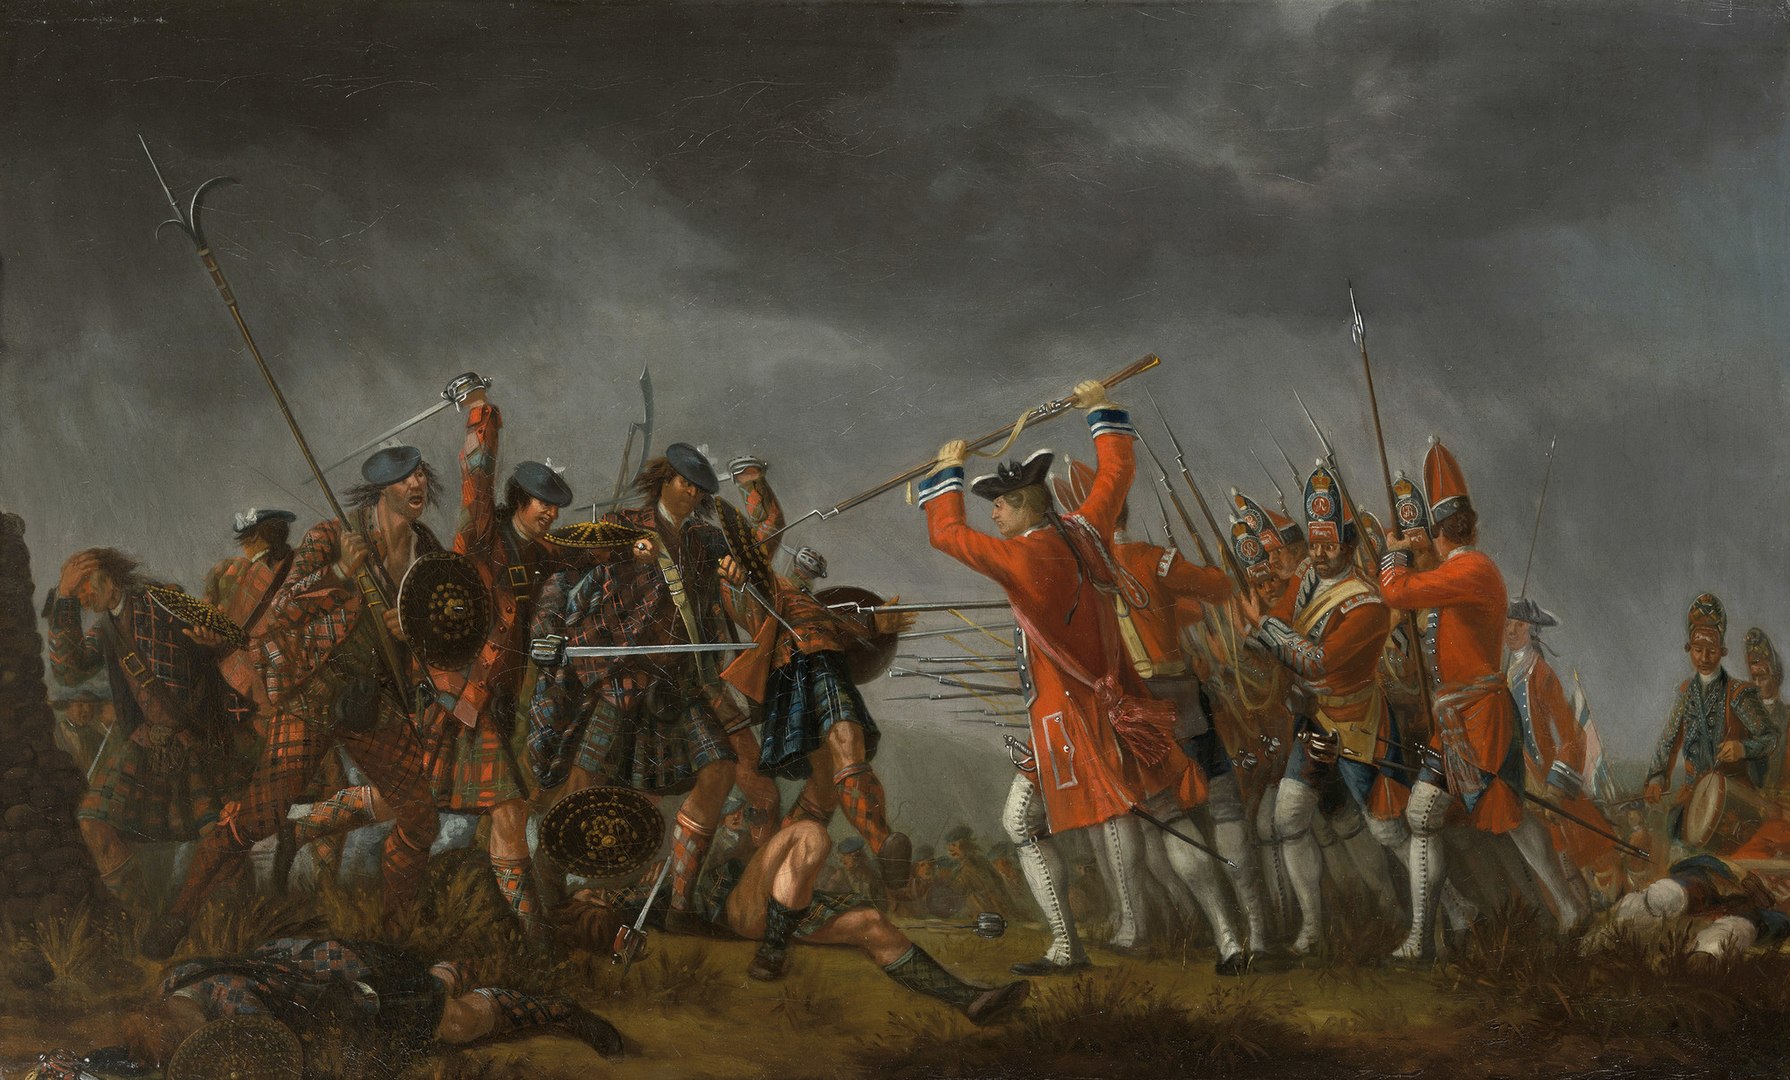 The Battle of Culloden in 1746.